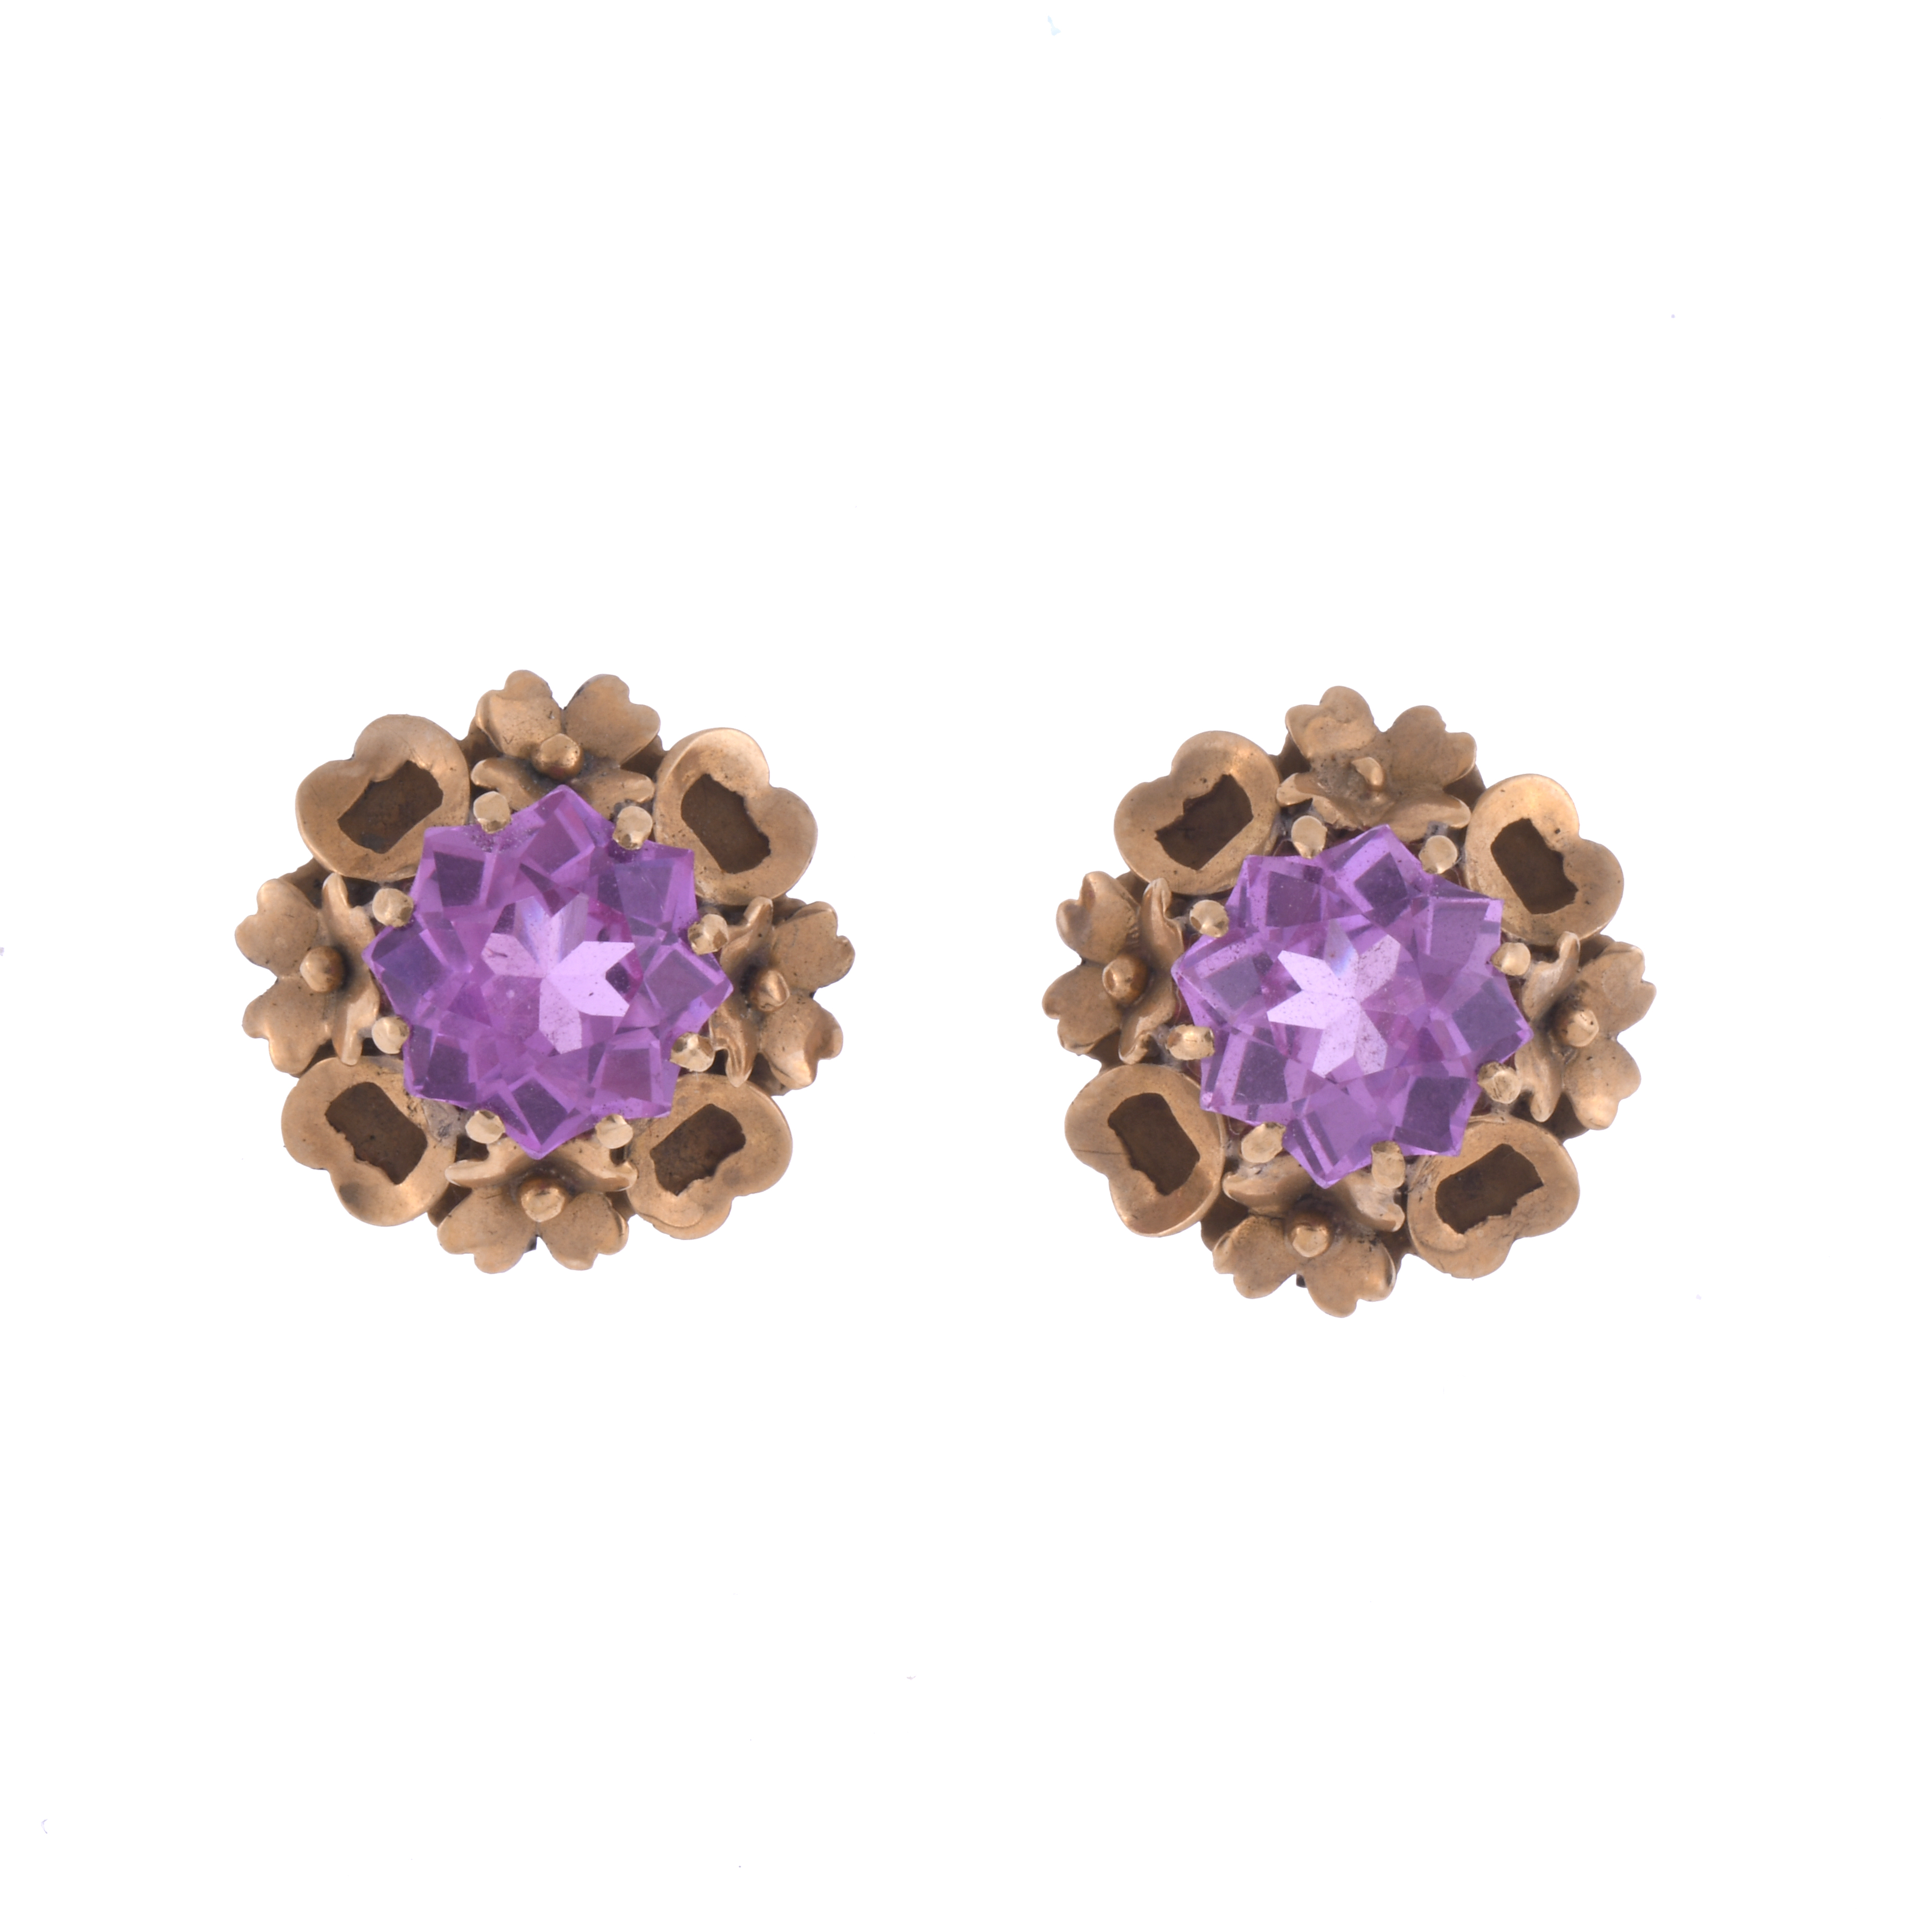 FLORAL EARRINGS WITH TOURMALINES.